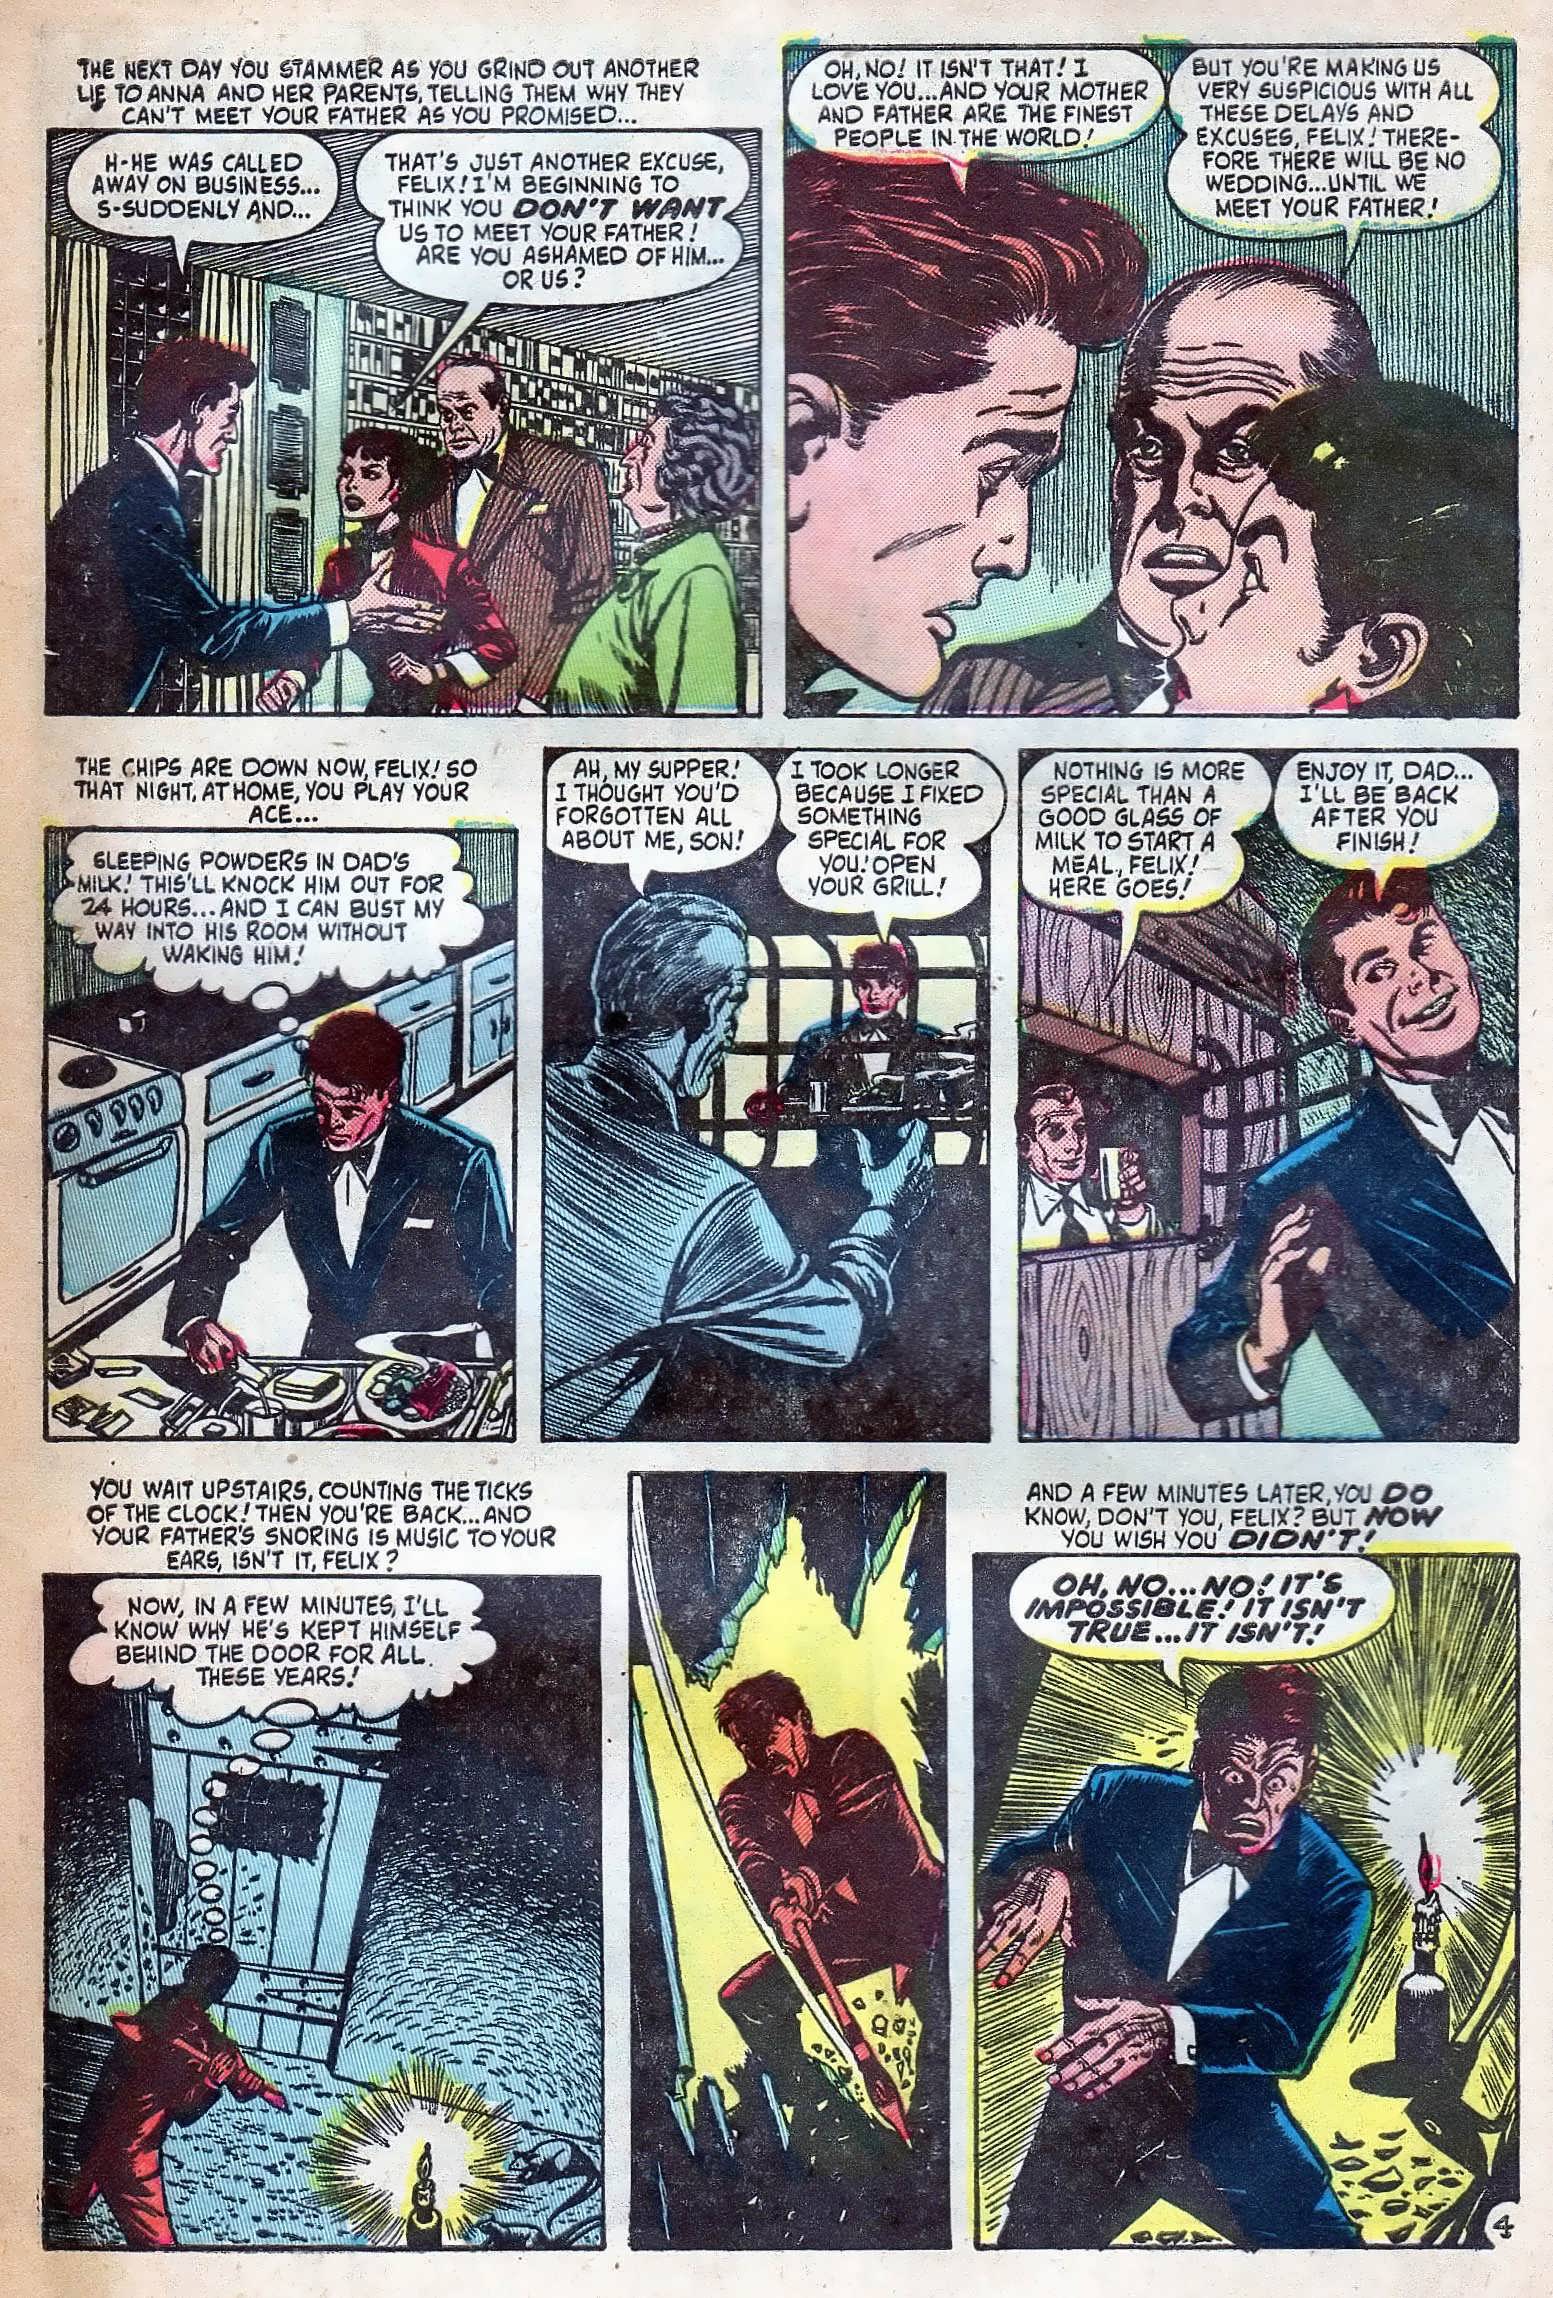 Marvel Tales (1949) 124 Page 5